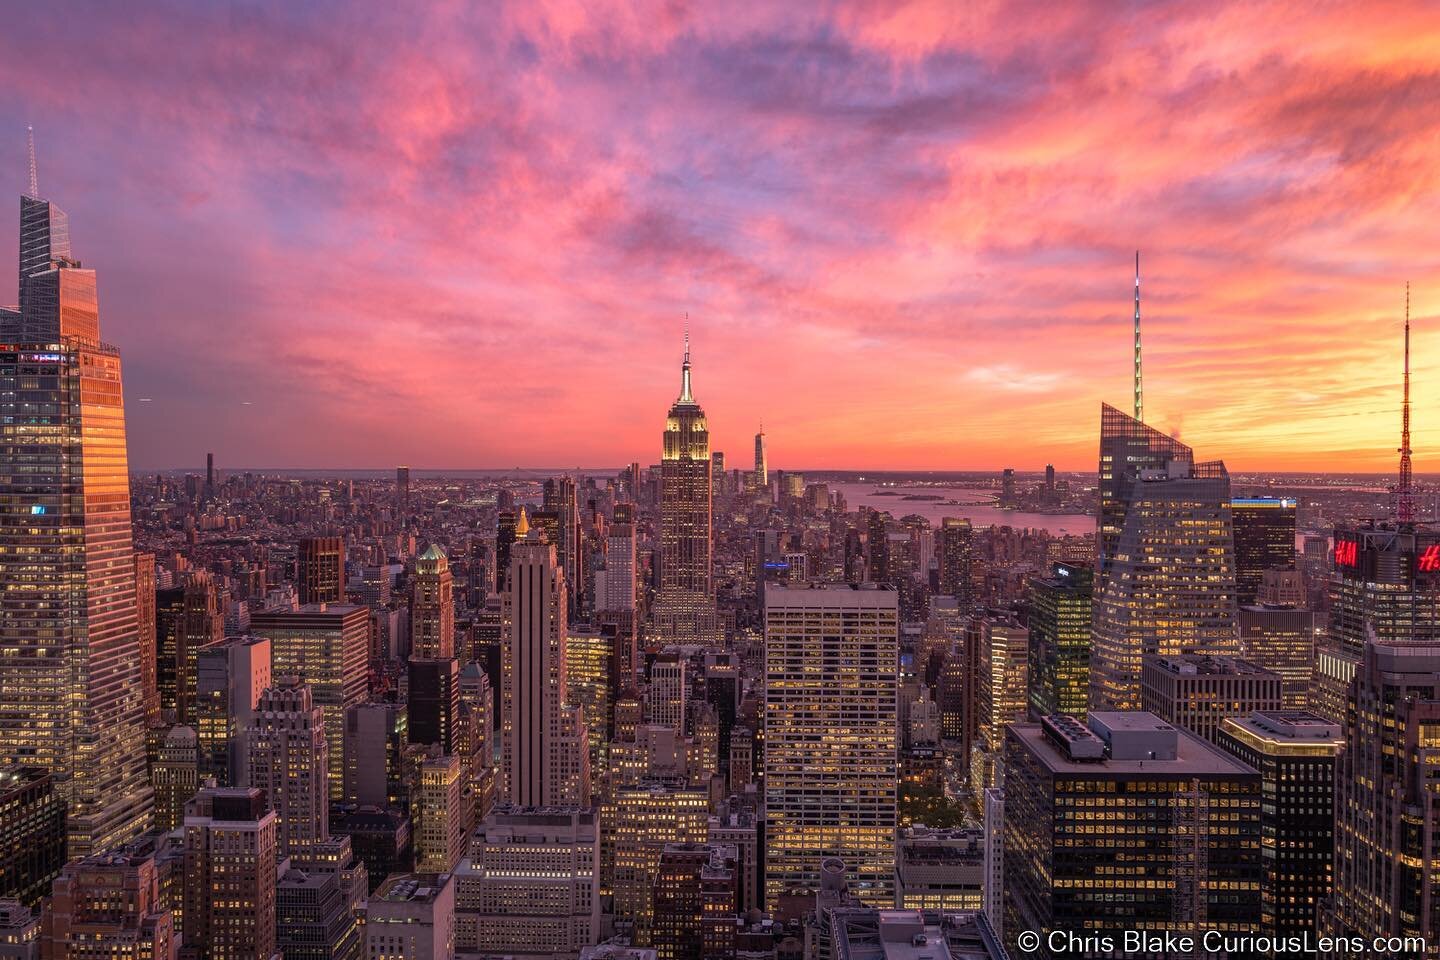 A stunning sunset from The Top of the Rock in New York City. 
.
.
.
Site: curiouslens.com
.
.
.
#newyork #newyorkcity #newyork_instagram #newyorkcitylife #topoftherock #topoftherocknyc #sunset #sunsetphotography #empirestatebuilding #oneworldtradecen